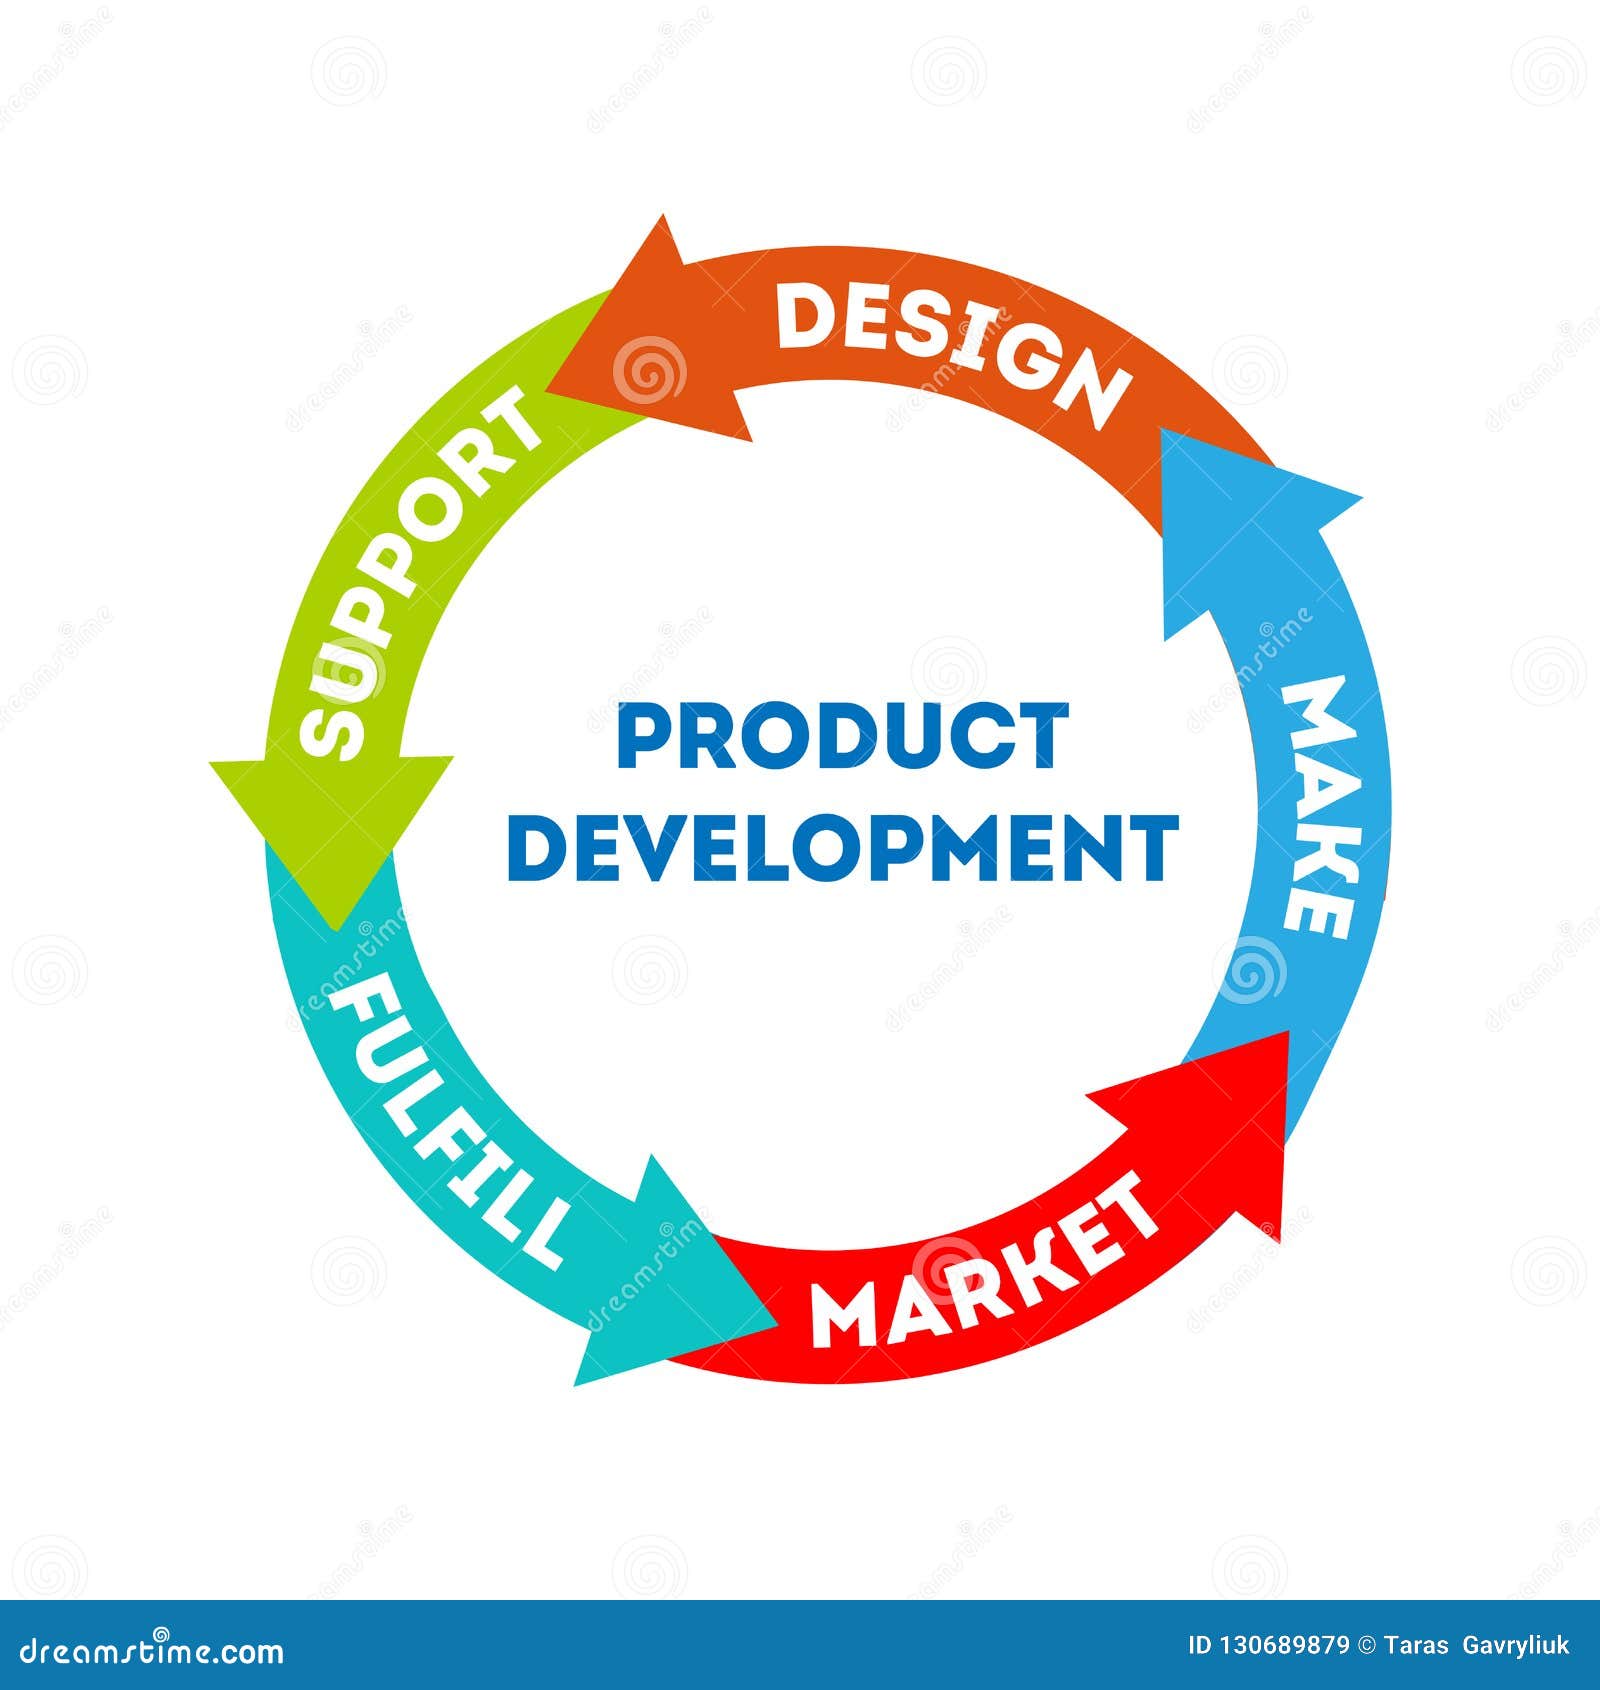 The Concept of Product Development Stock Vector - Illustration of ...